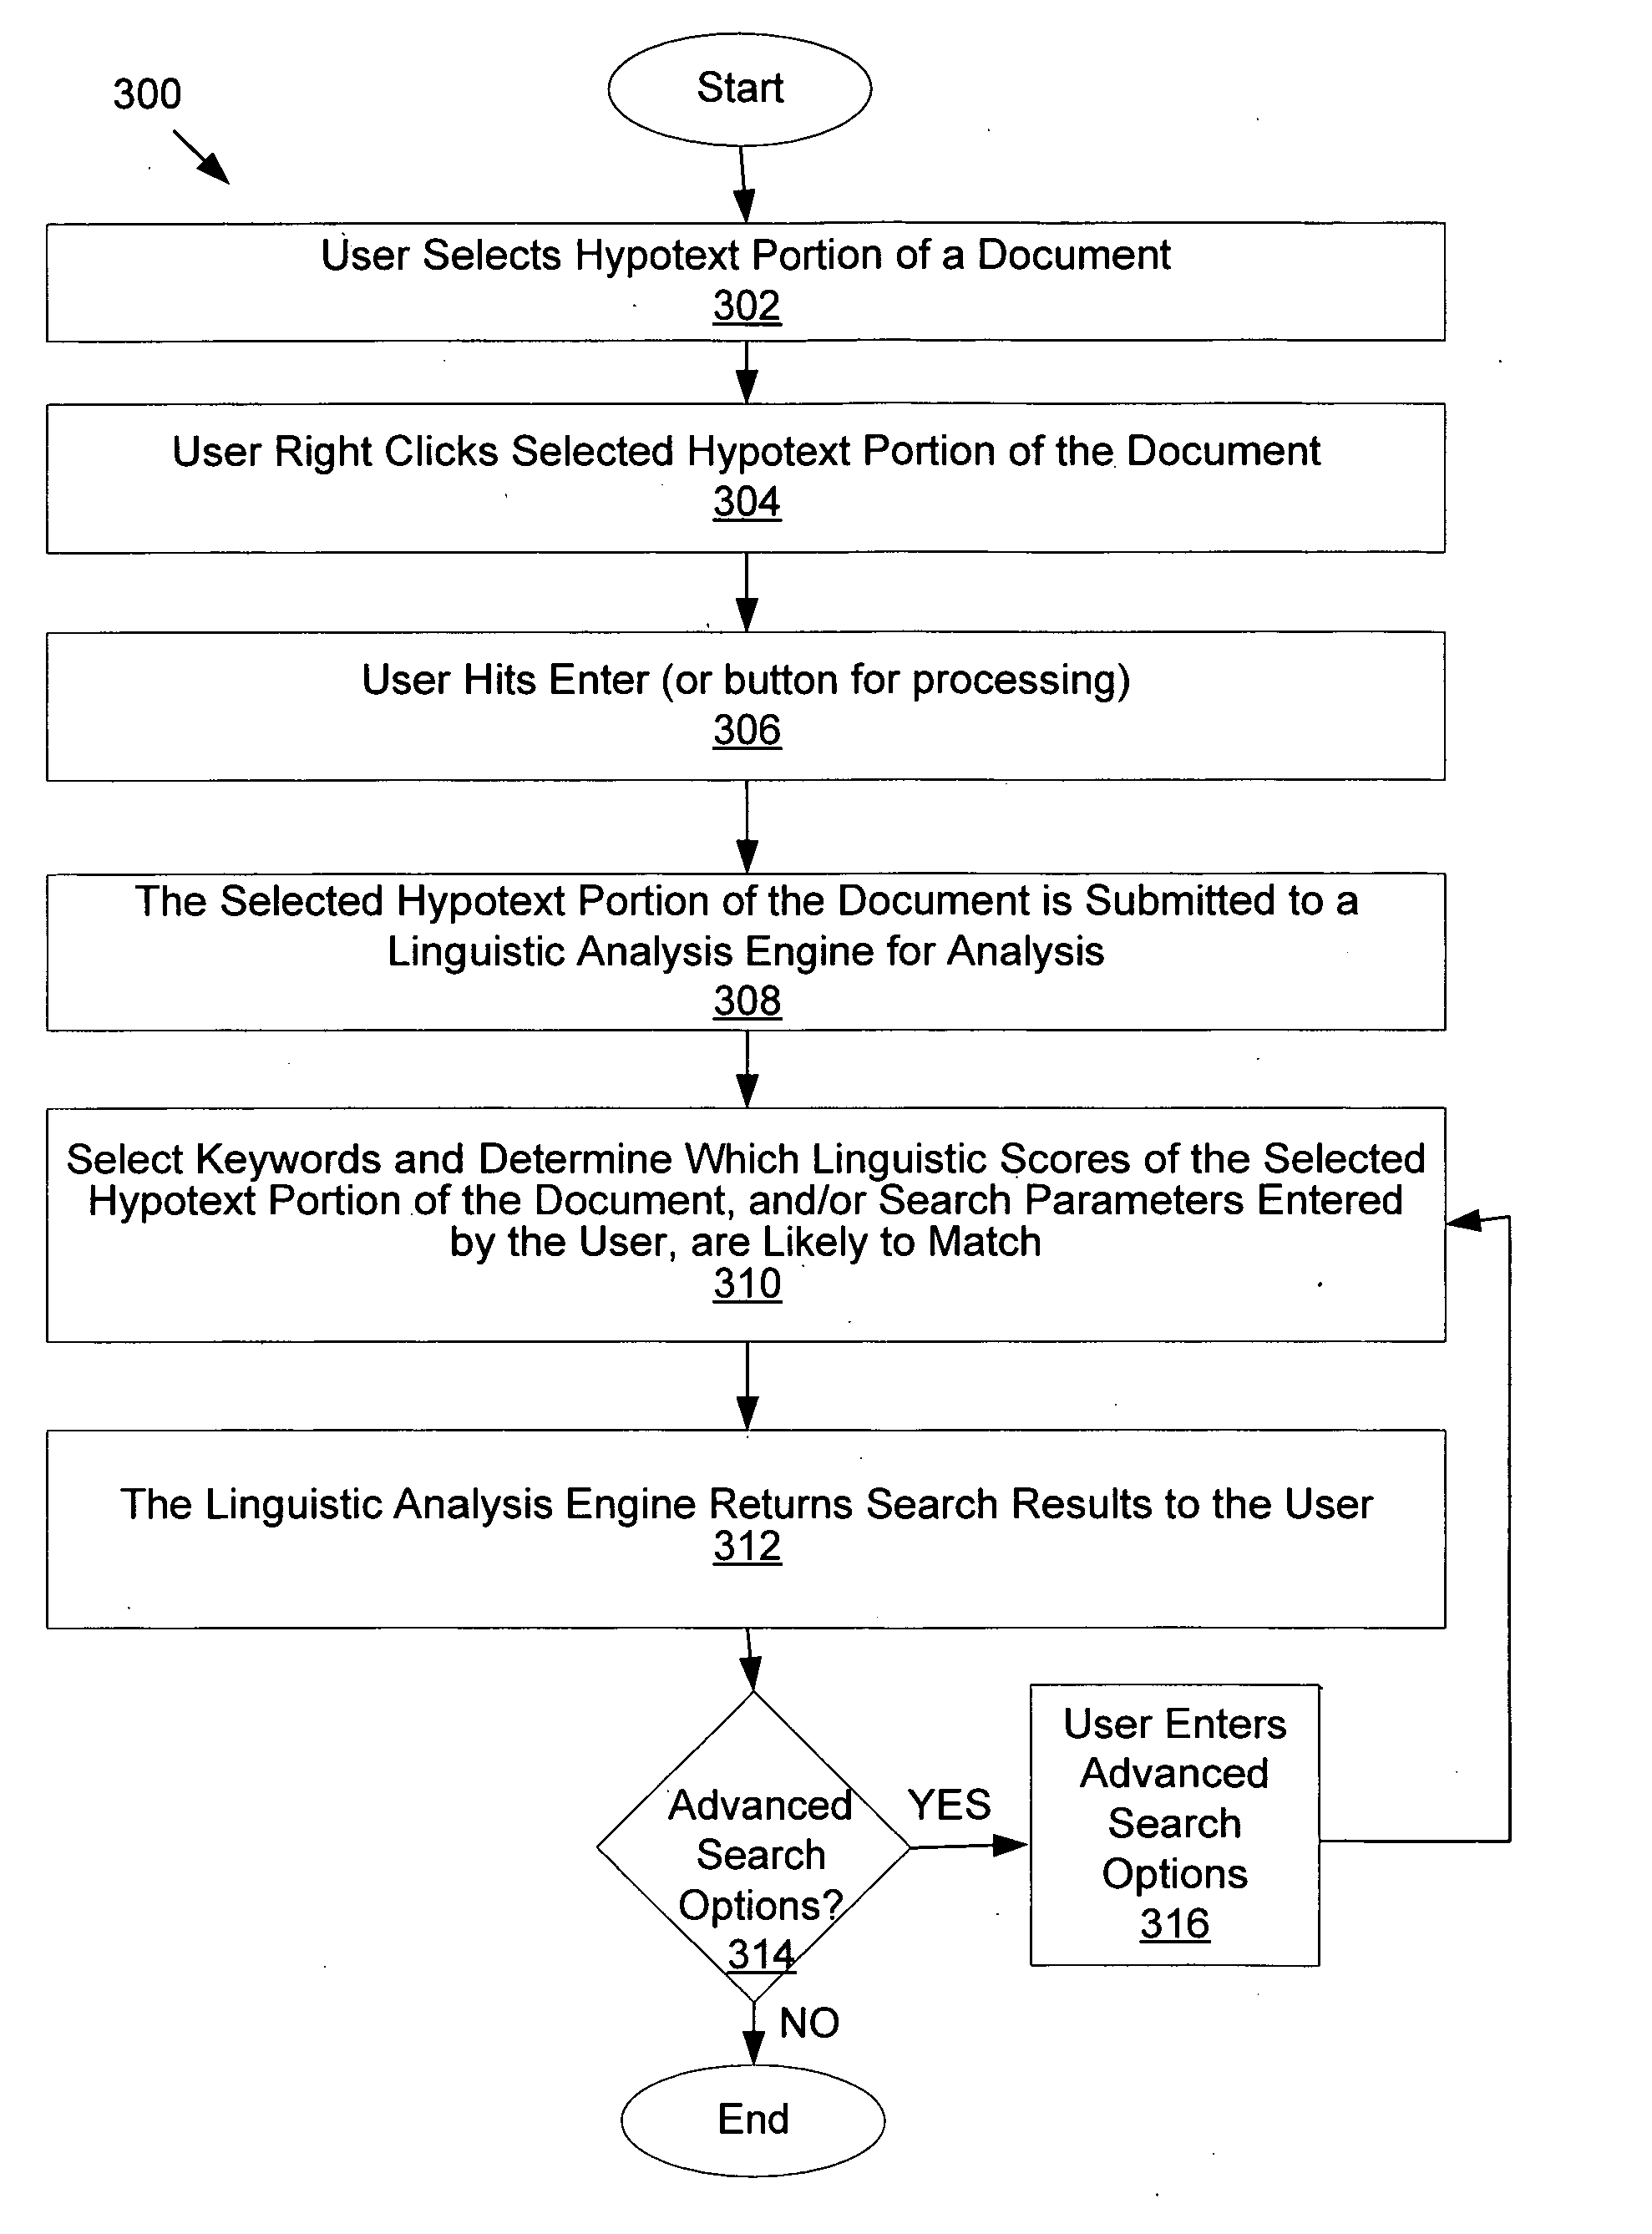 Systems and methods for providing search results based on linguistic analysis